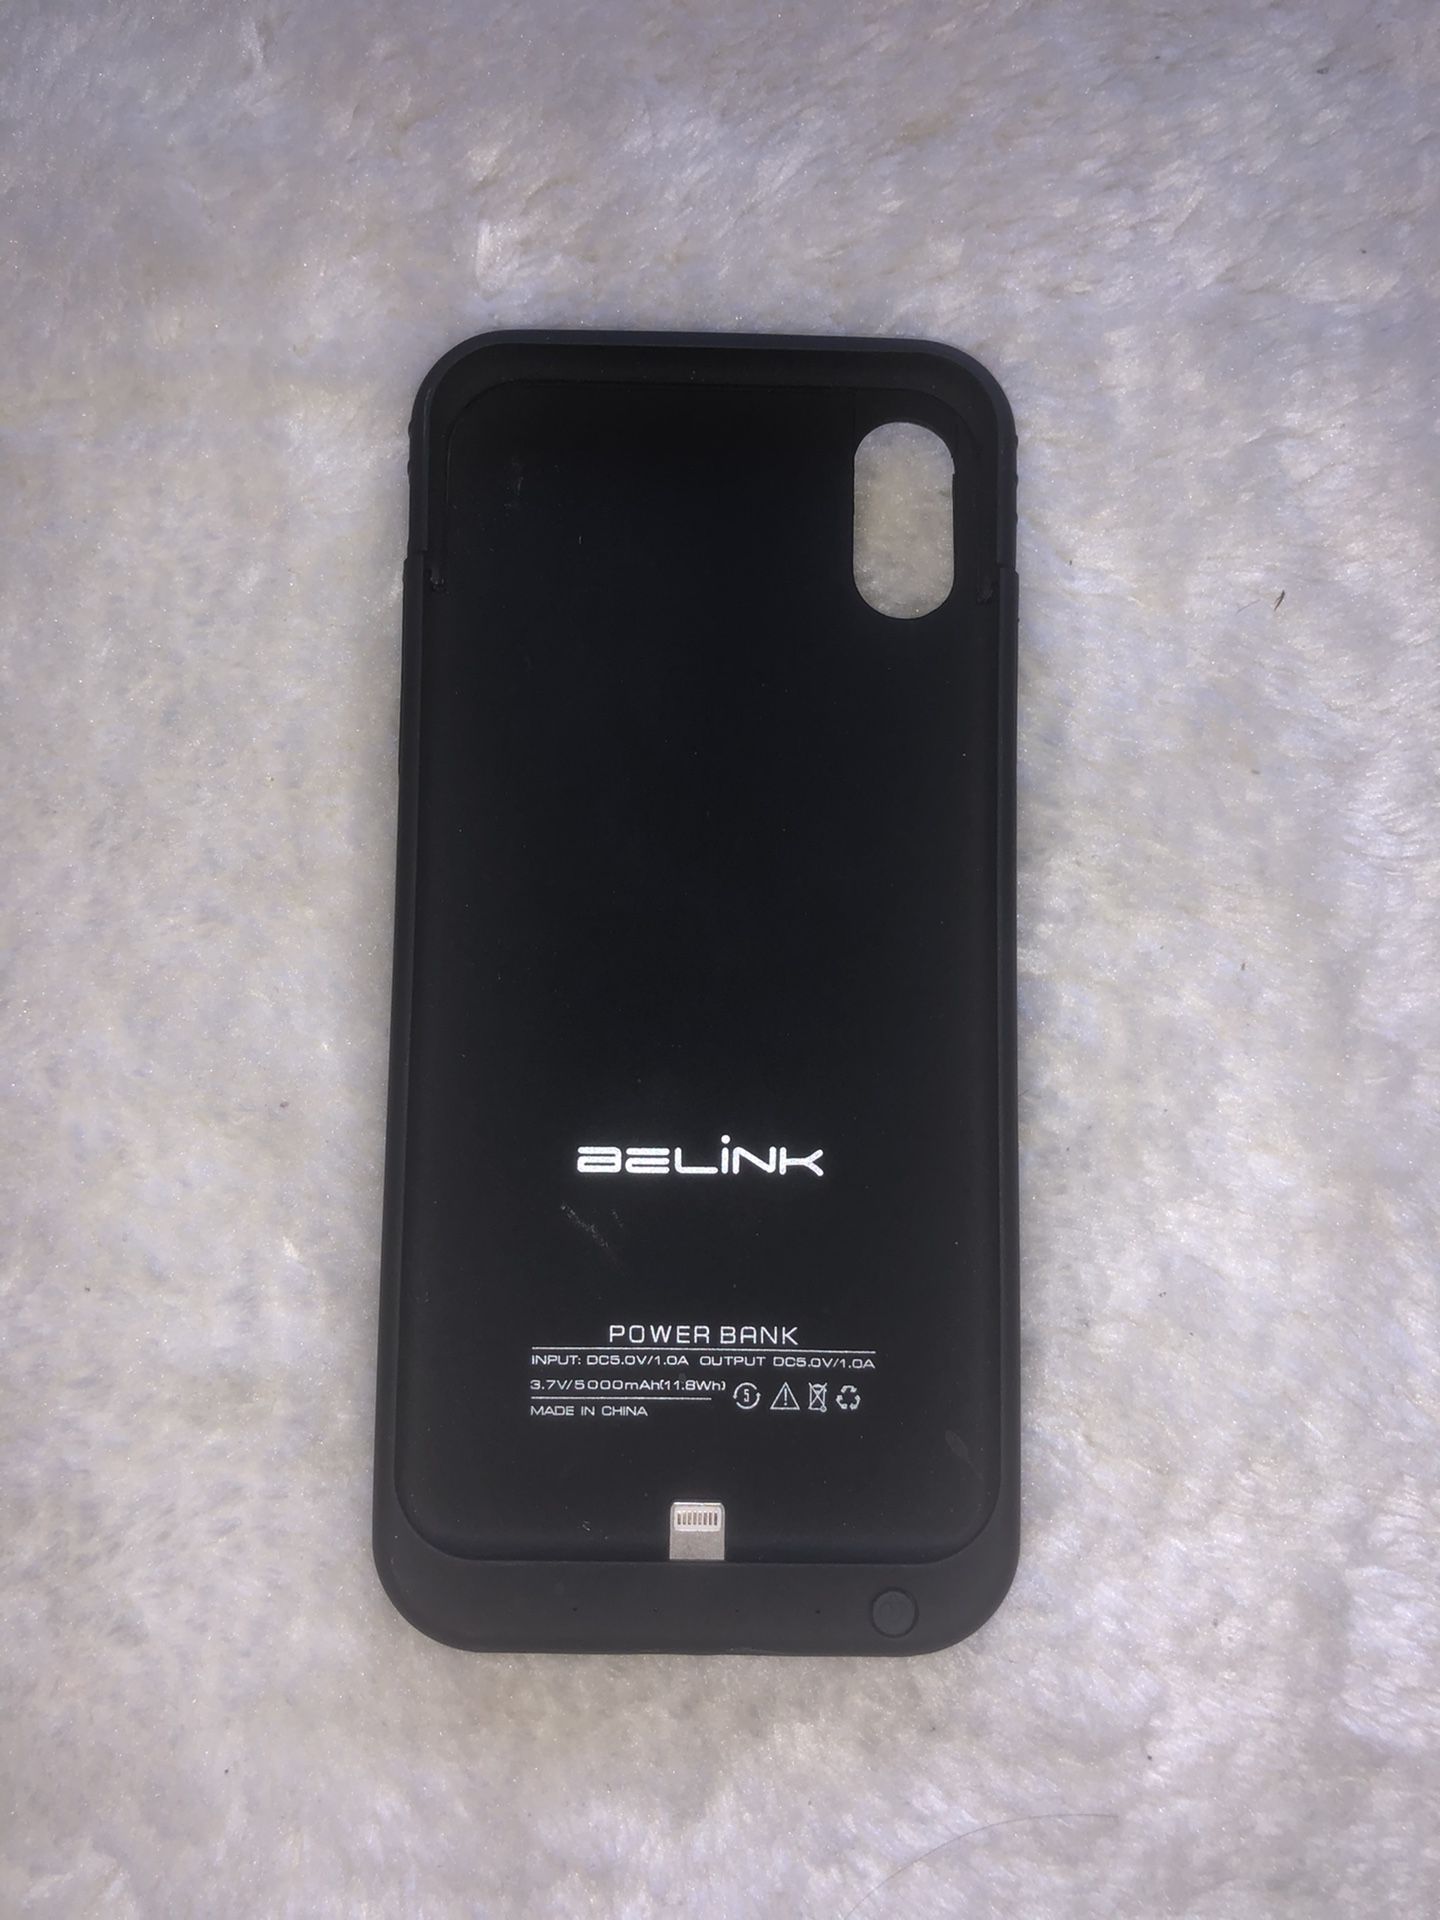 Belink charger case for iPhone X